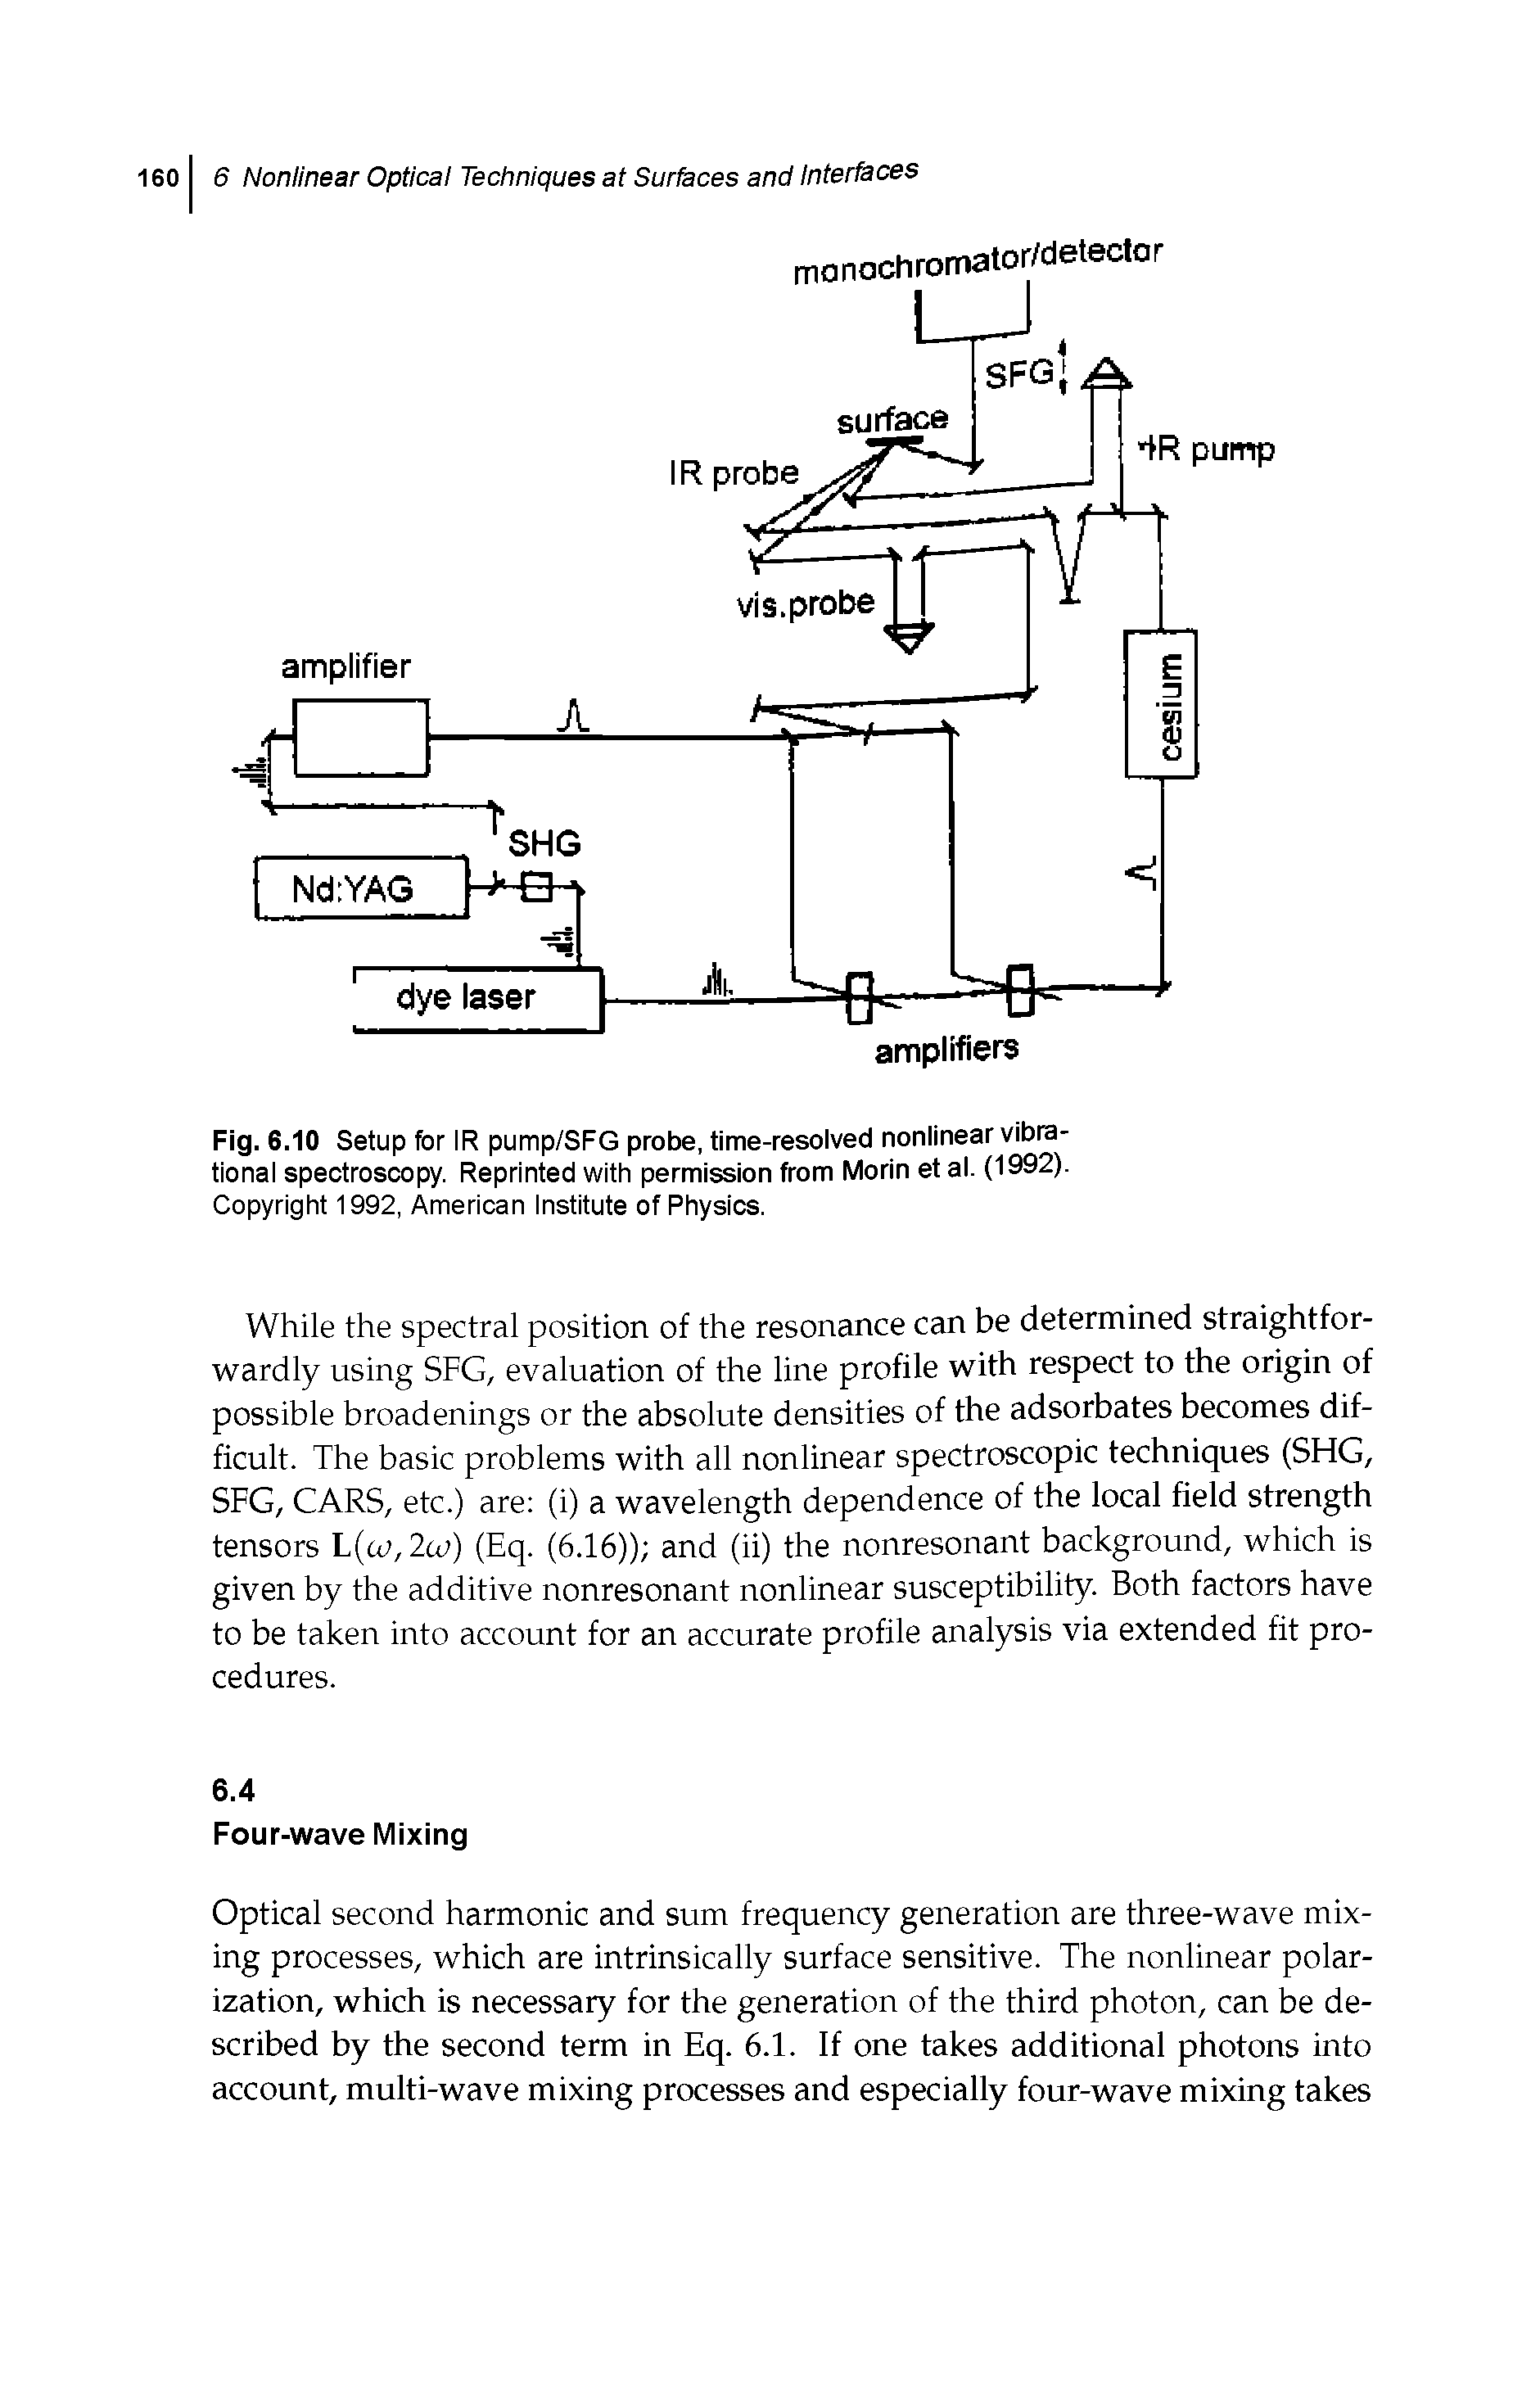 Fig. 6.10 Setup for IR pump/SFG probe, time-resolved nonlinear vibrational spectroscopy. Reprinted with permission from Morin et al. (1992). Copyright 1992, American Institute of Physics.